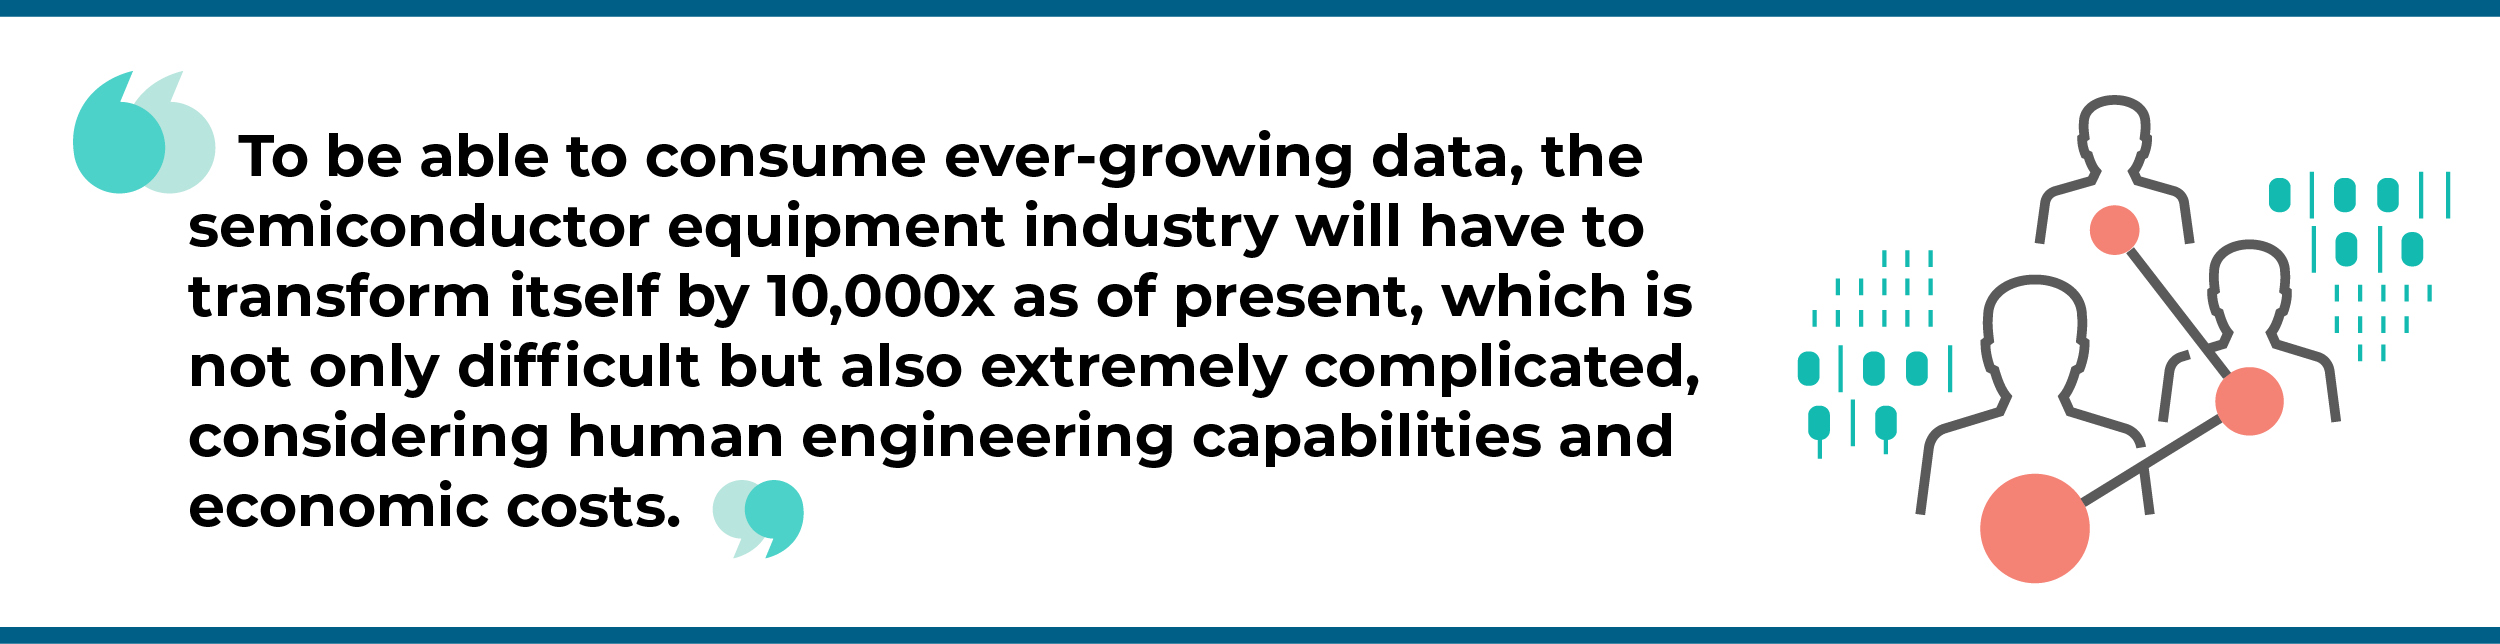 ai in semiconductor industry quote1